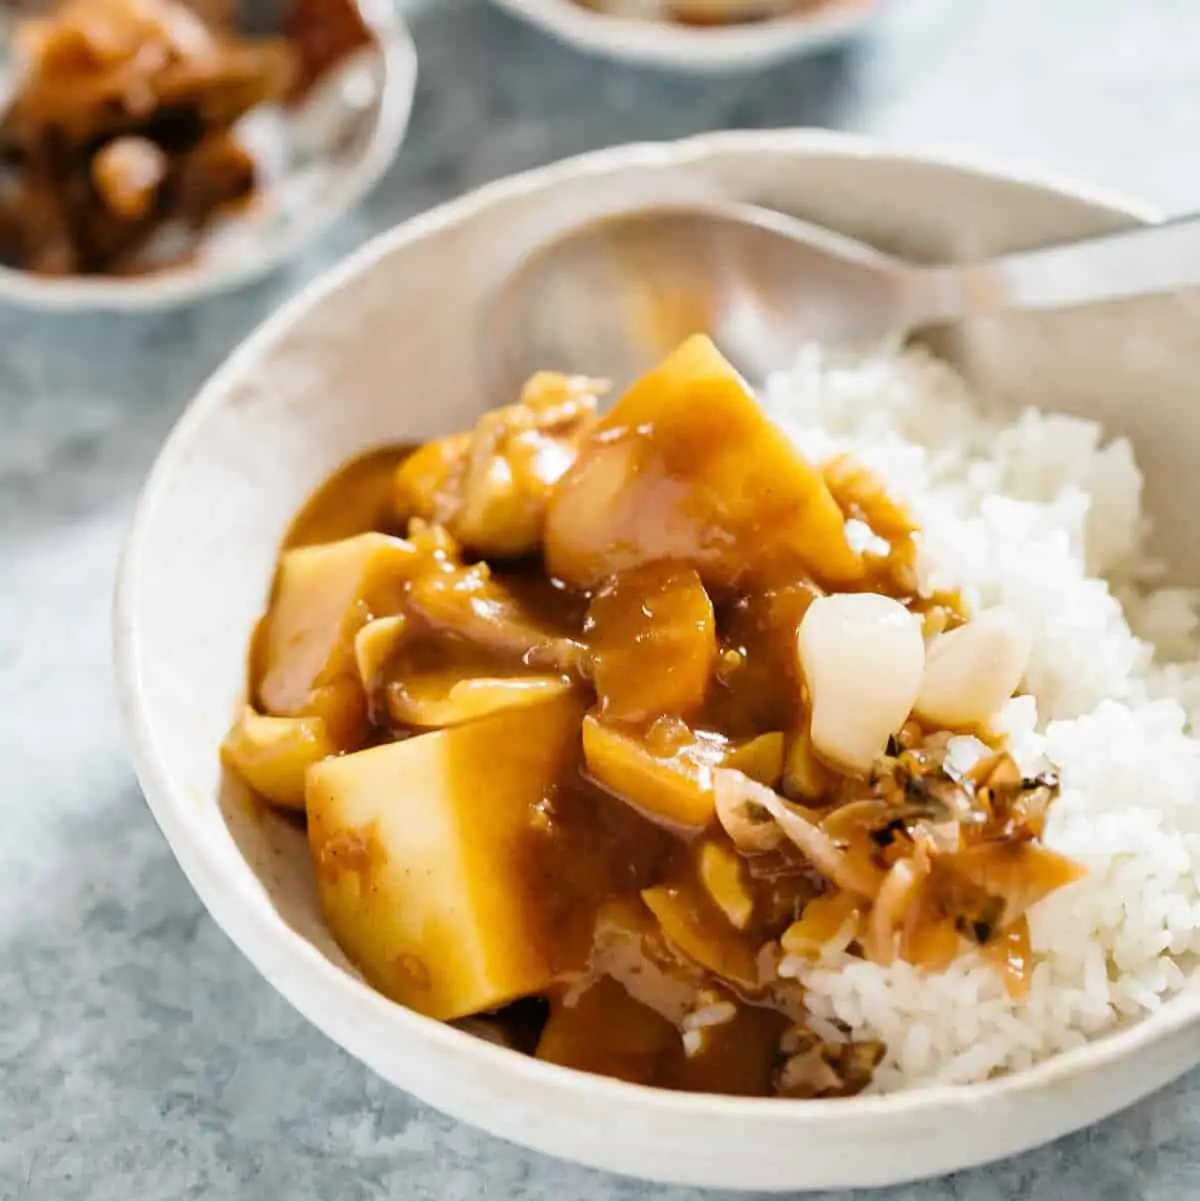 Japanese curry served with plain cooked rice in a bowl